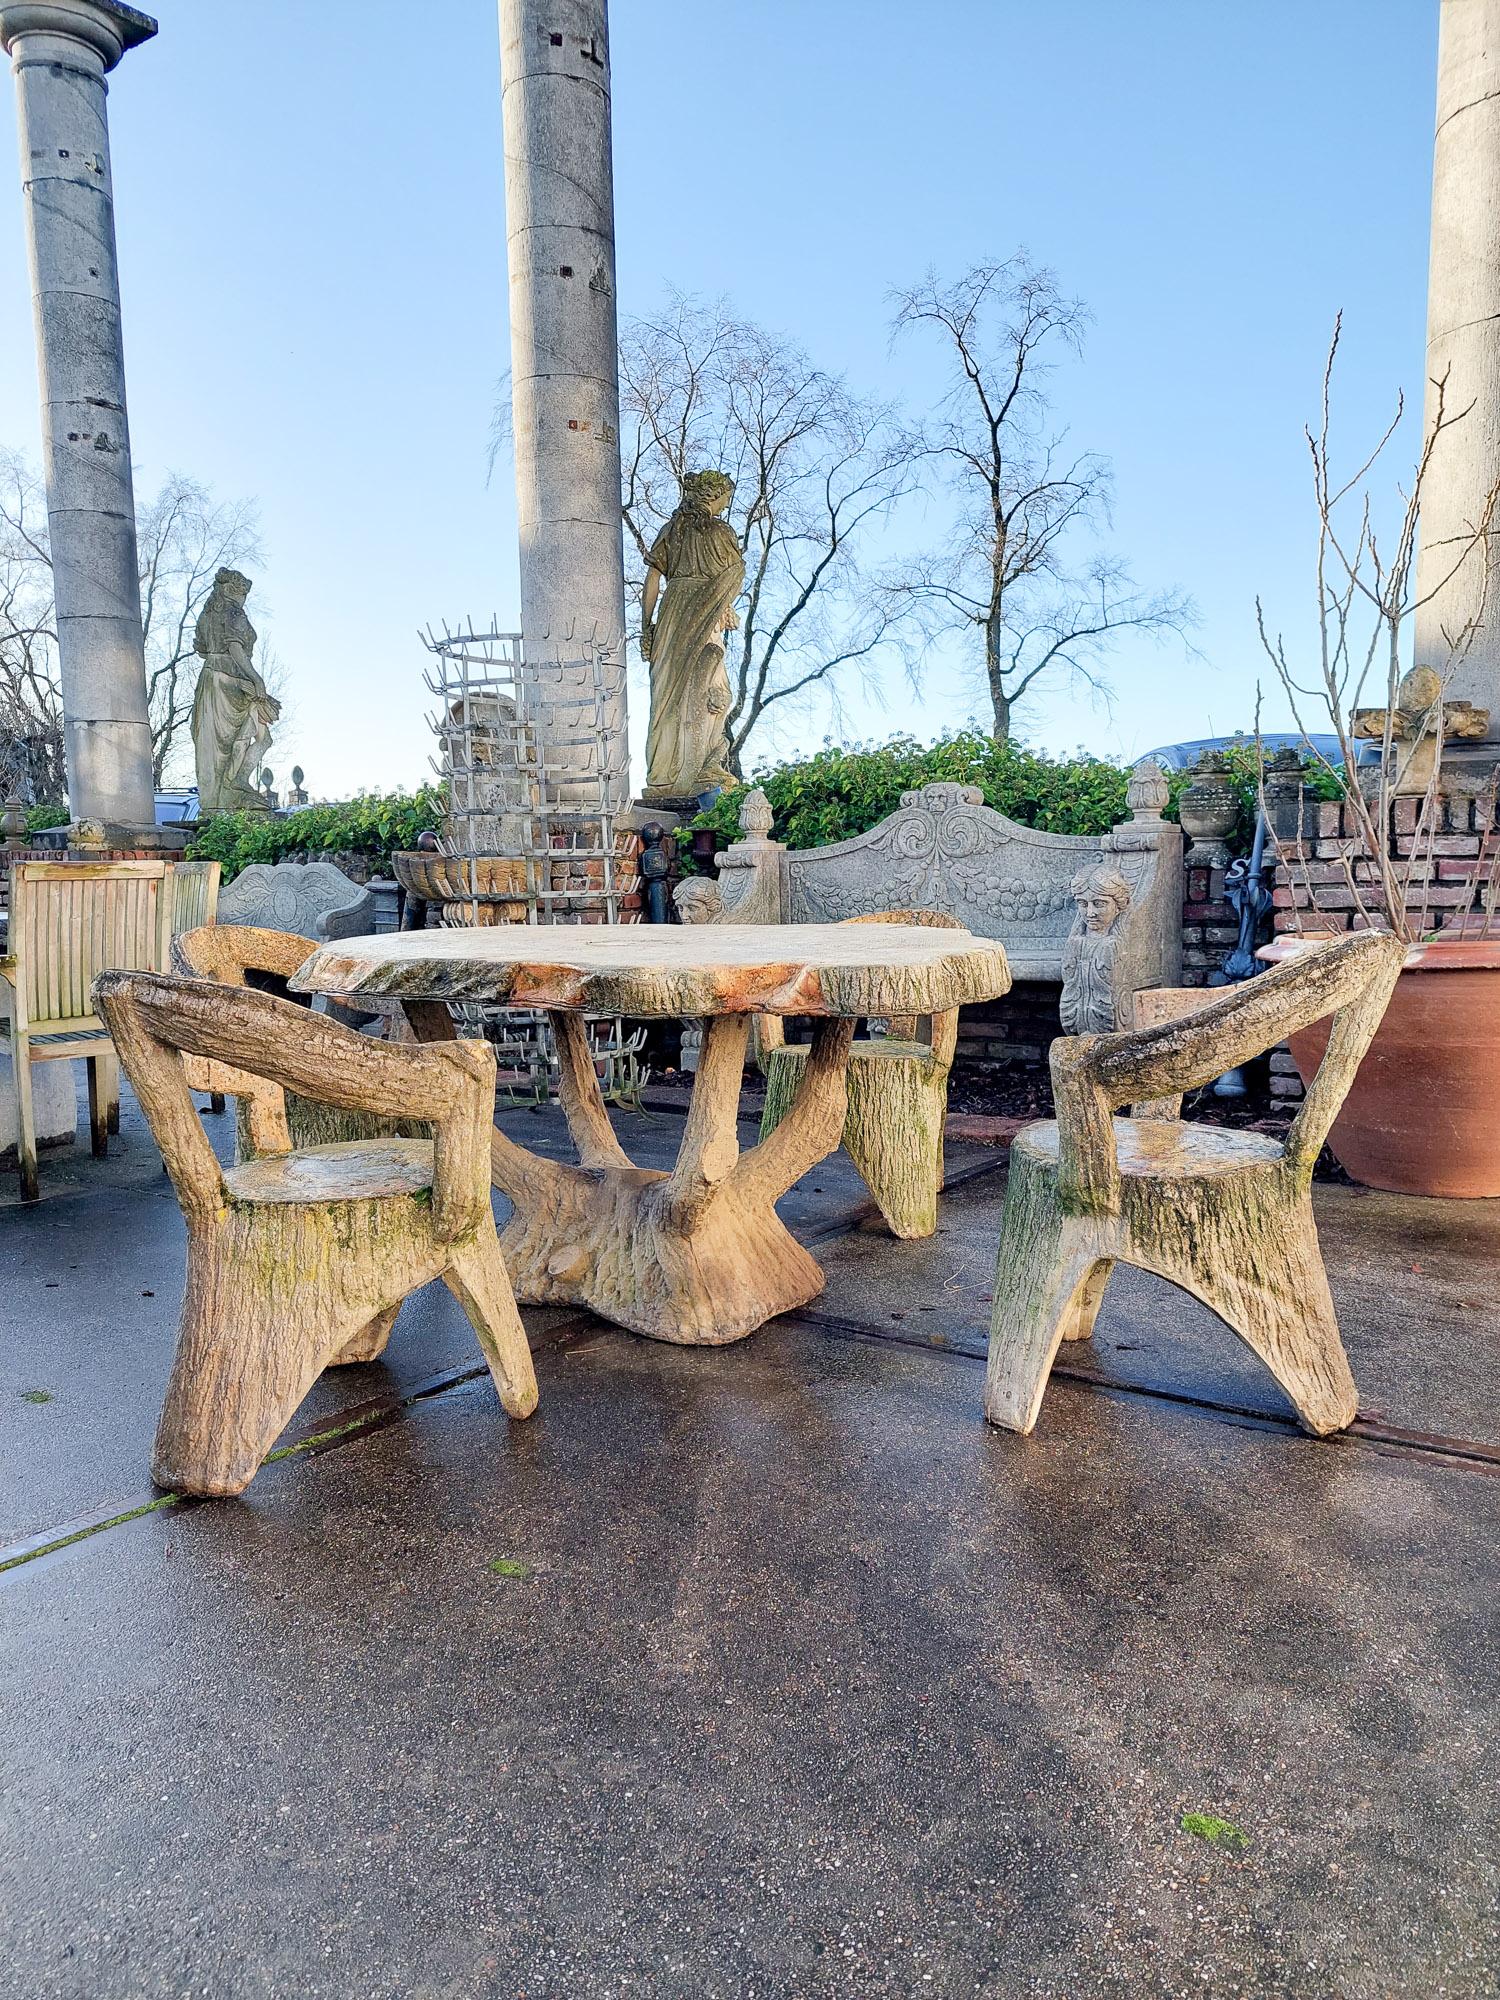 A mid-century faux bois stone garden table and chairs. Faux Bois (false wood) refers to the artistic imitation of wood and wood grain. This rustic composite garden set consists of four chairs and a table, each with a natural relief of tree stump and